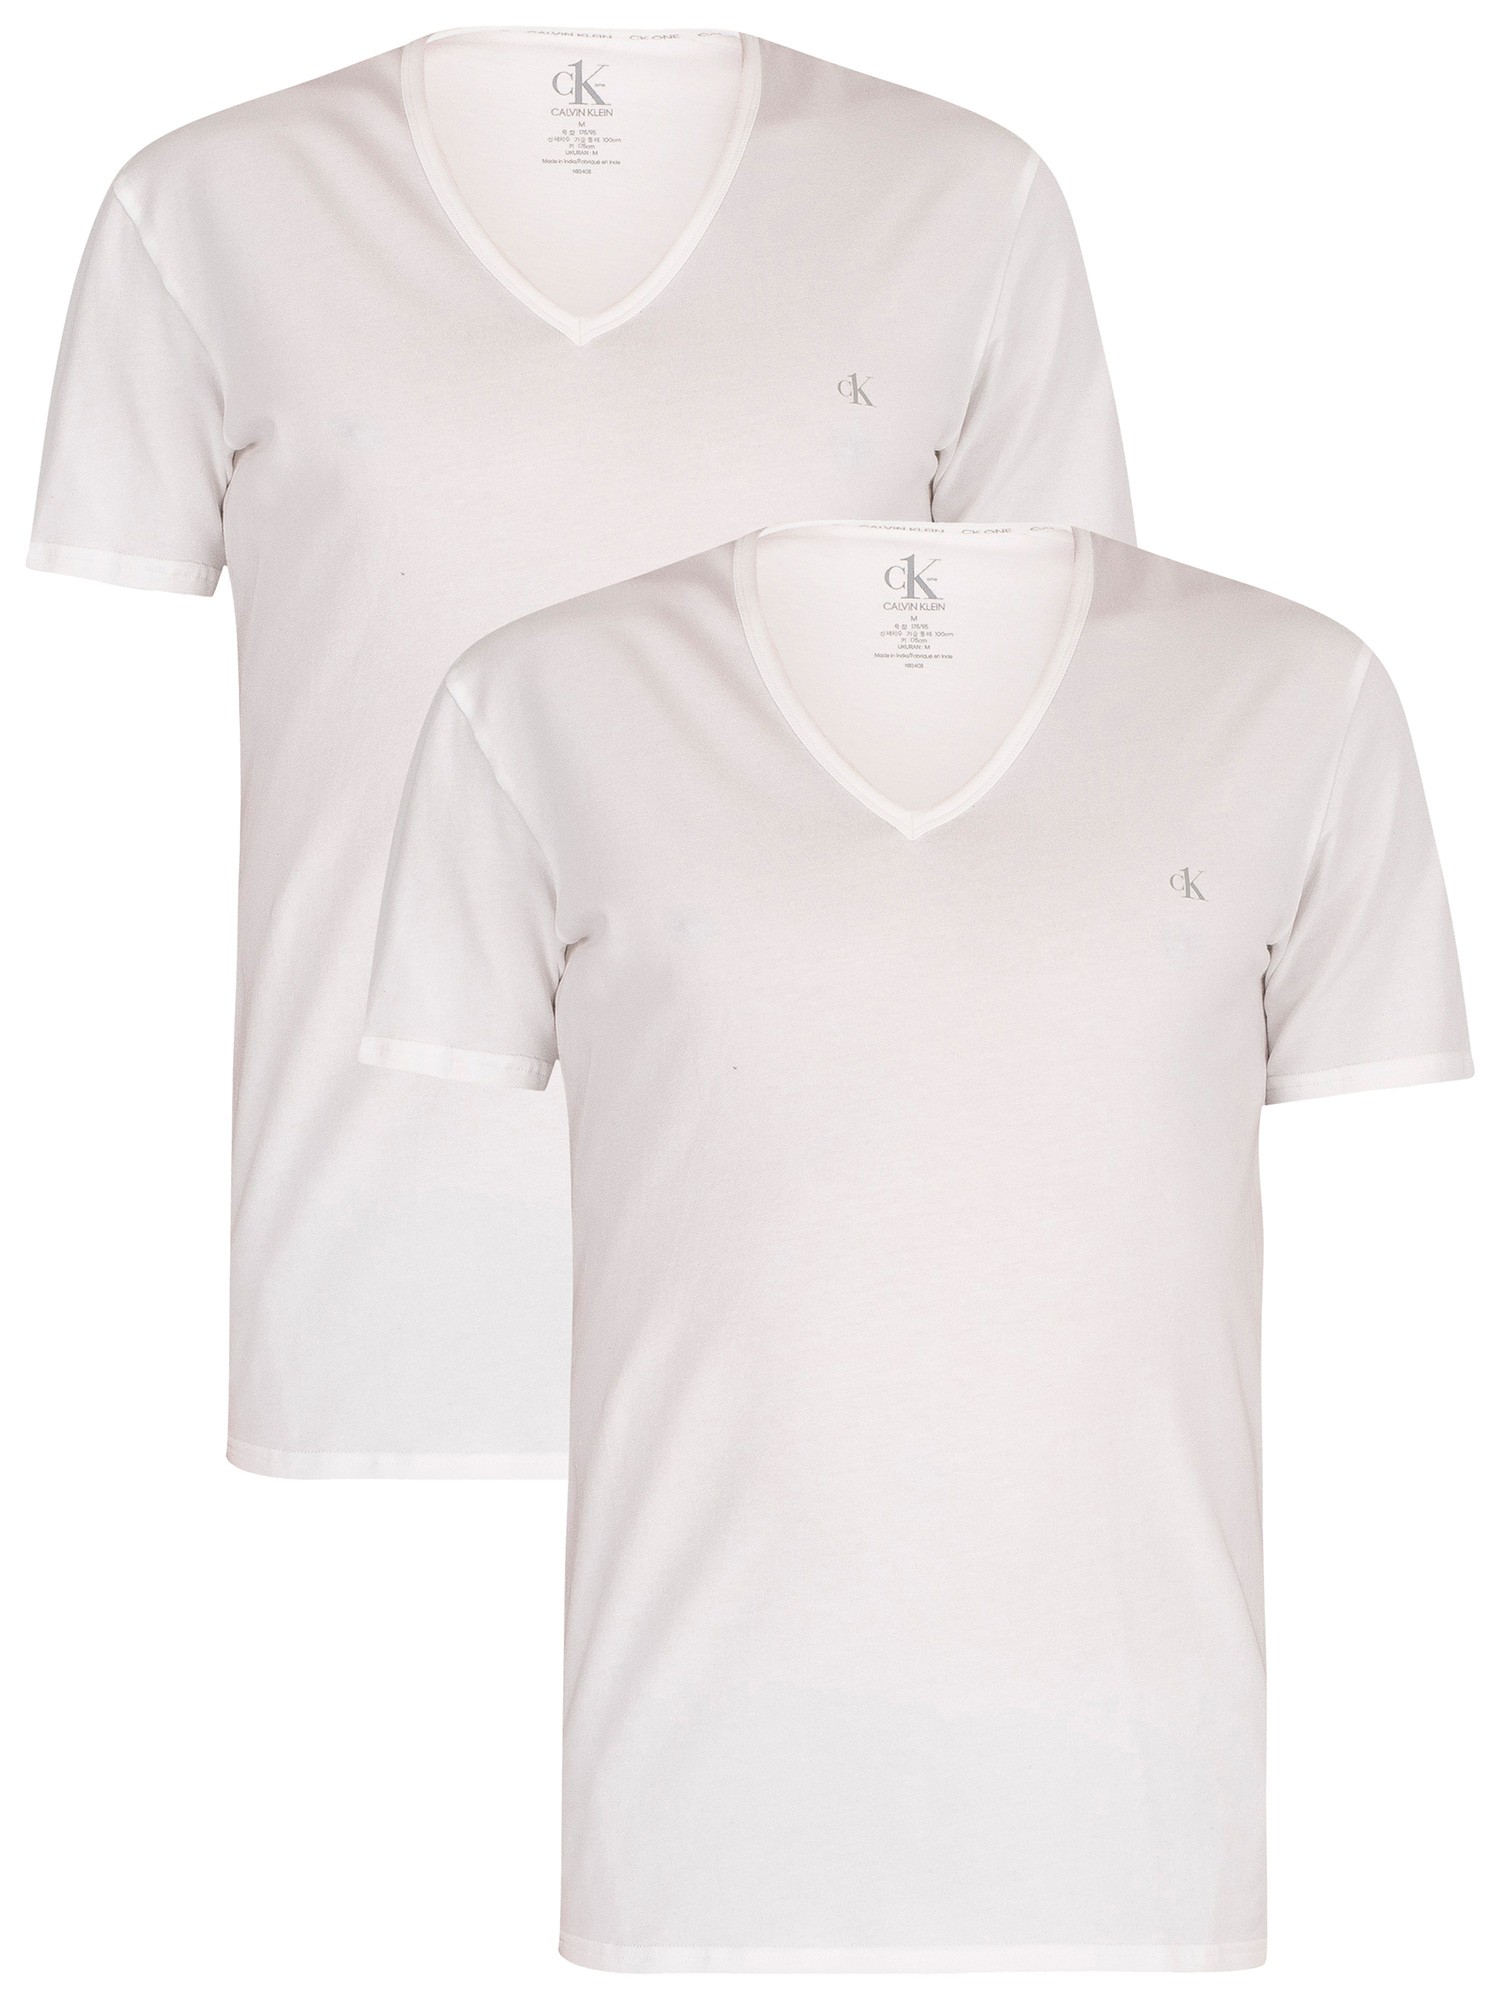 Calvin Klein 2 Pack CK One V-Neck T-Shirts - White | Standout